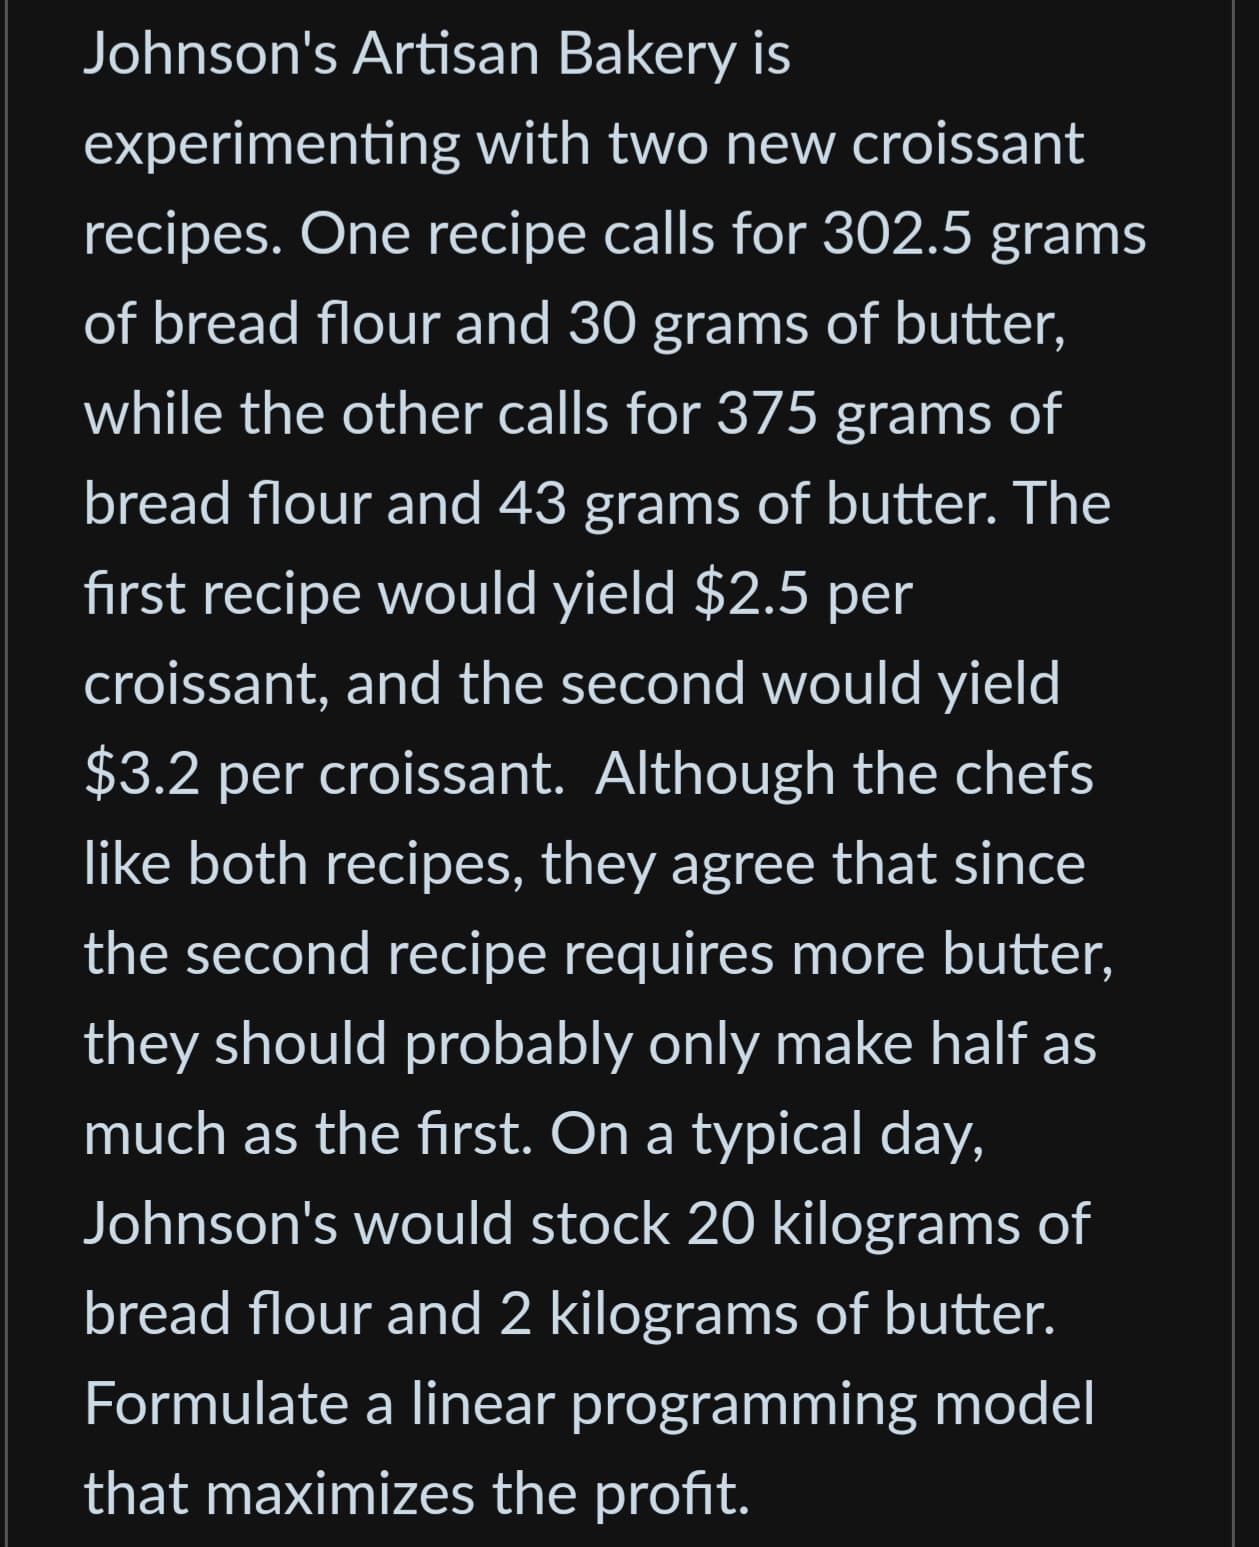 Johnson's Artisan Bakery is
experimenting with two new croissant
recipes. One recipe calls for 302.5 grams
of bread flour and 30 grams of butter,
while the other calls for 375 grams of
bread flour and 43 grams of butter. The
first recipe would yield $2.5 per
croissant, and the second would yield
$3.2 per croissant. Although the chefs
like both recipes, they agree that since
the second recipe requires more butter,
they should probably only make half as
much as the first. On a typical day,
Johnson's would stock 20 kilograms of
bread flour and 2 kilograms of butter.
Formulate a linear programming model
that maximizes the profit.